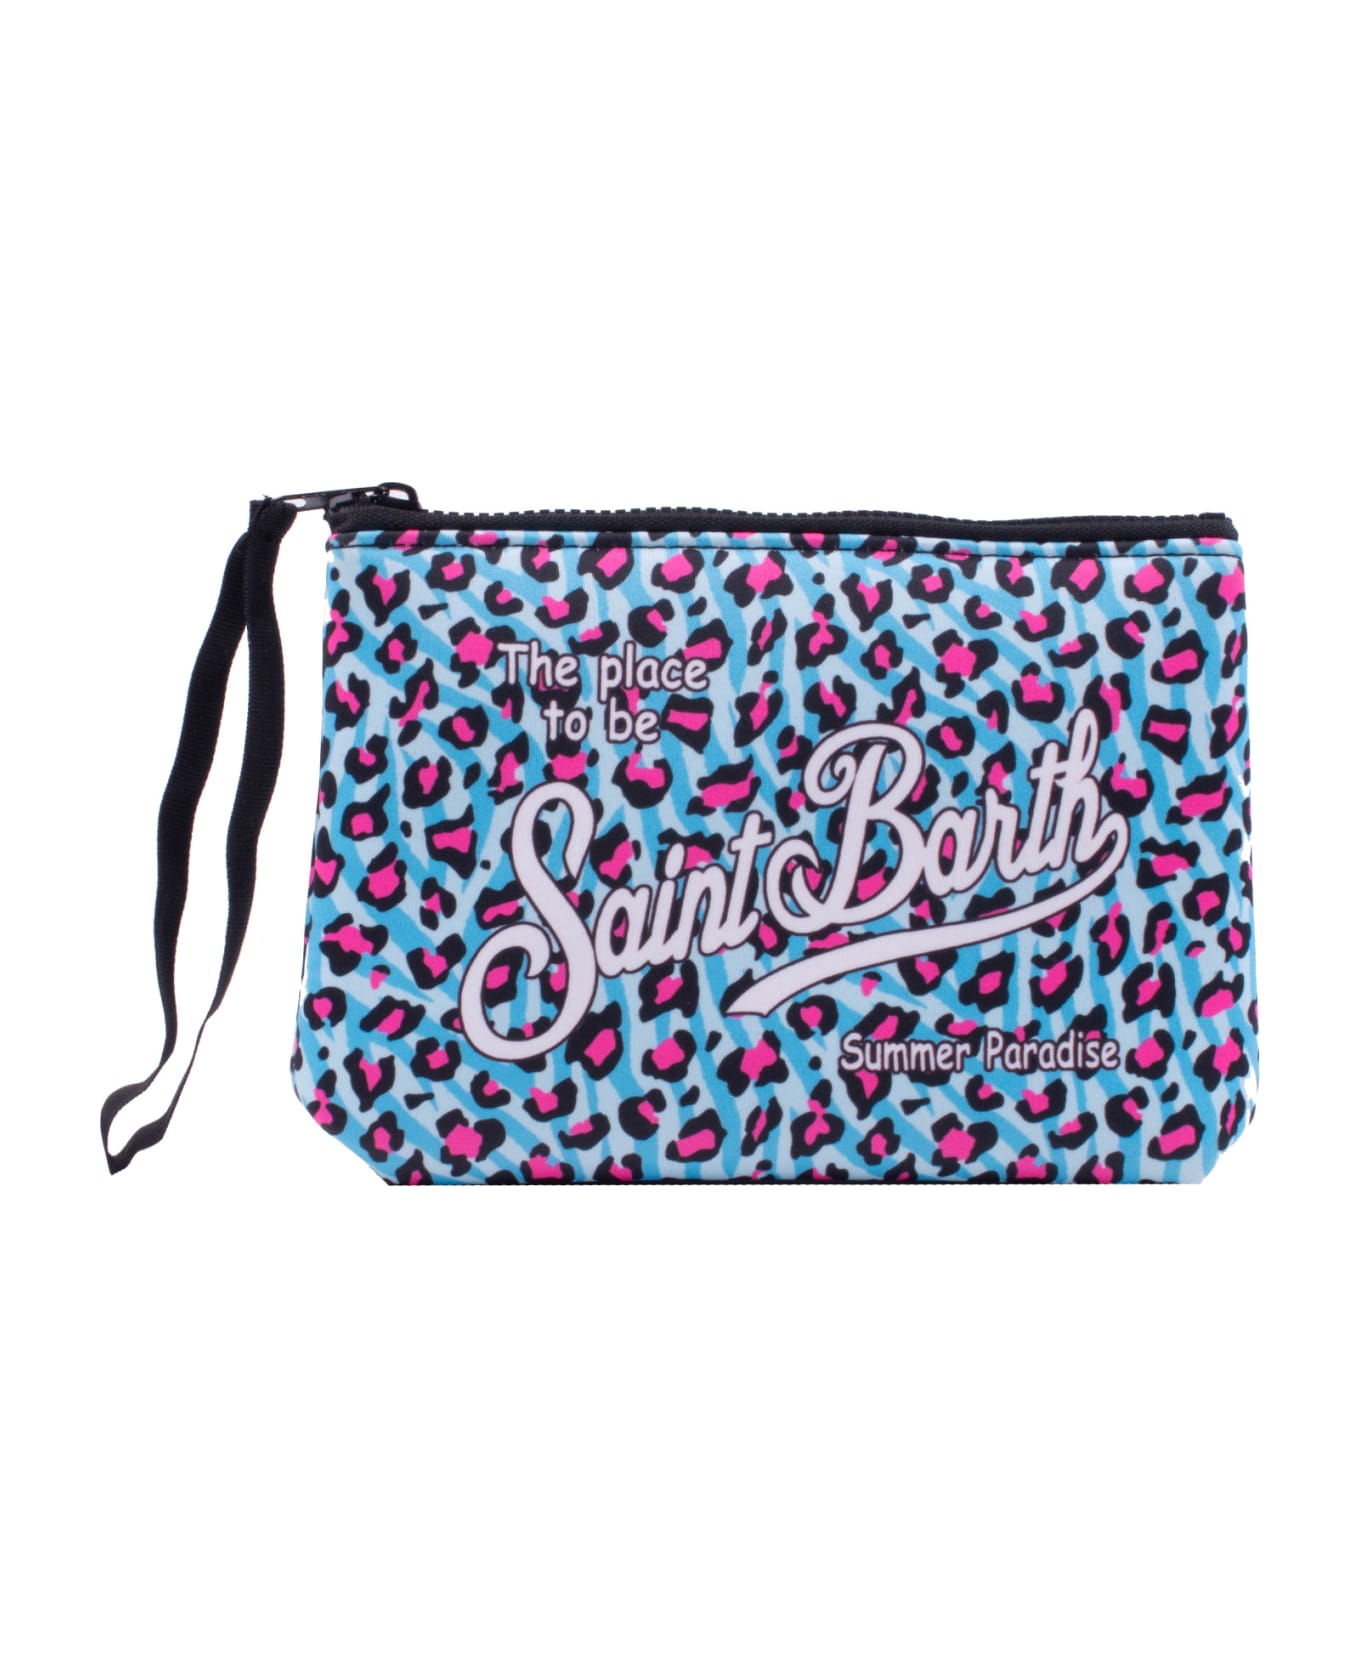 MC2 Saint Barth Clutch With Print - Multicolor アクセサリー＆ギフト